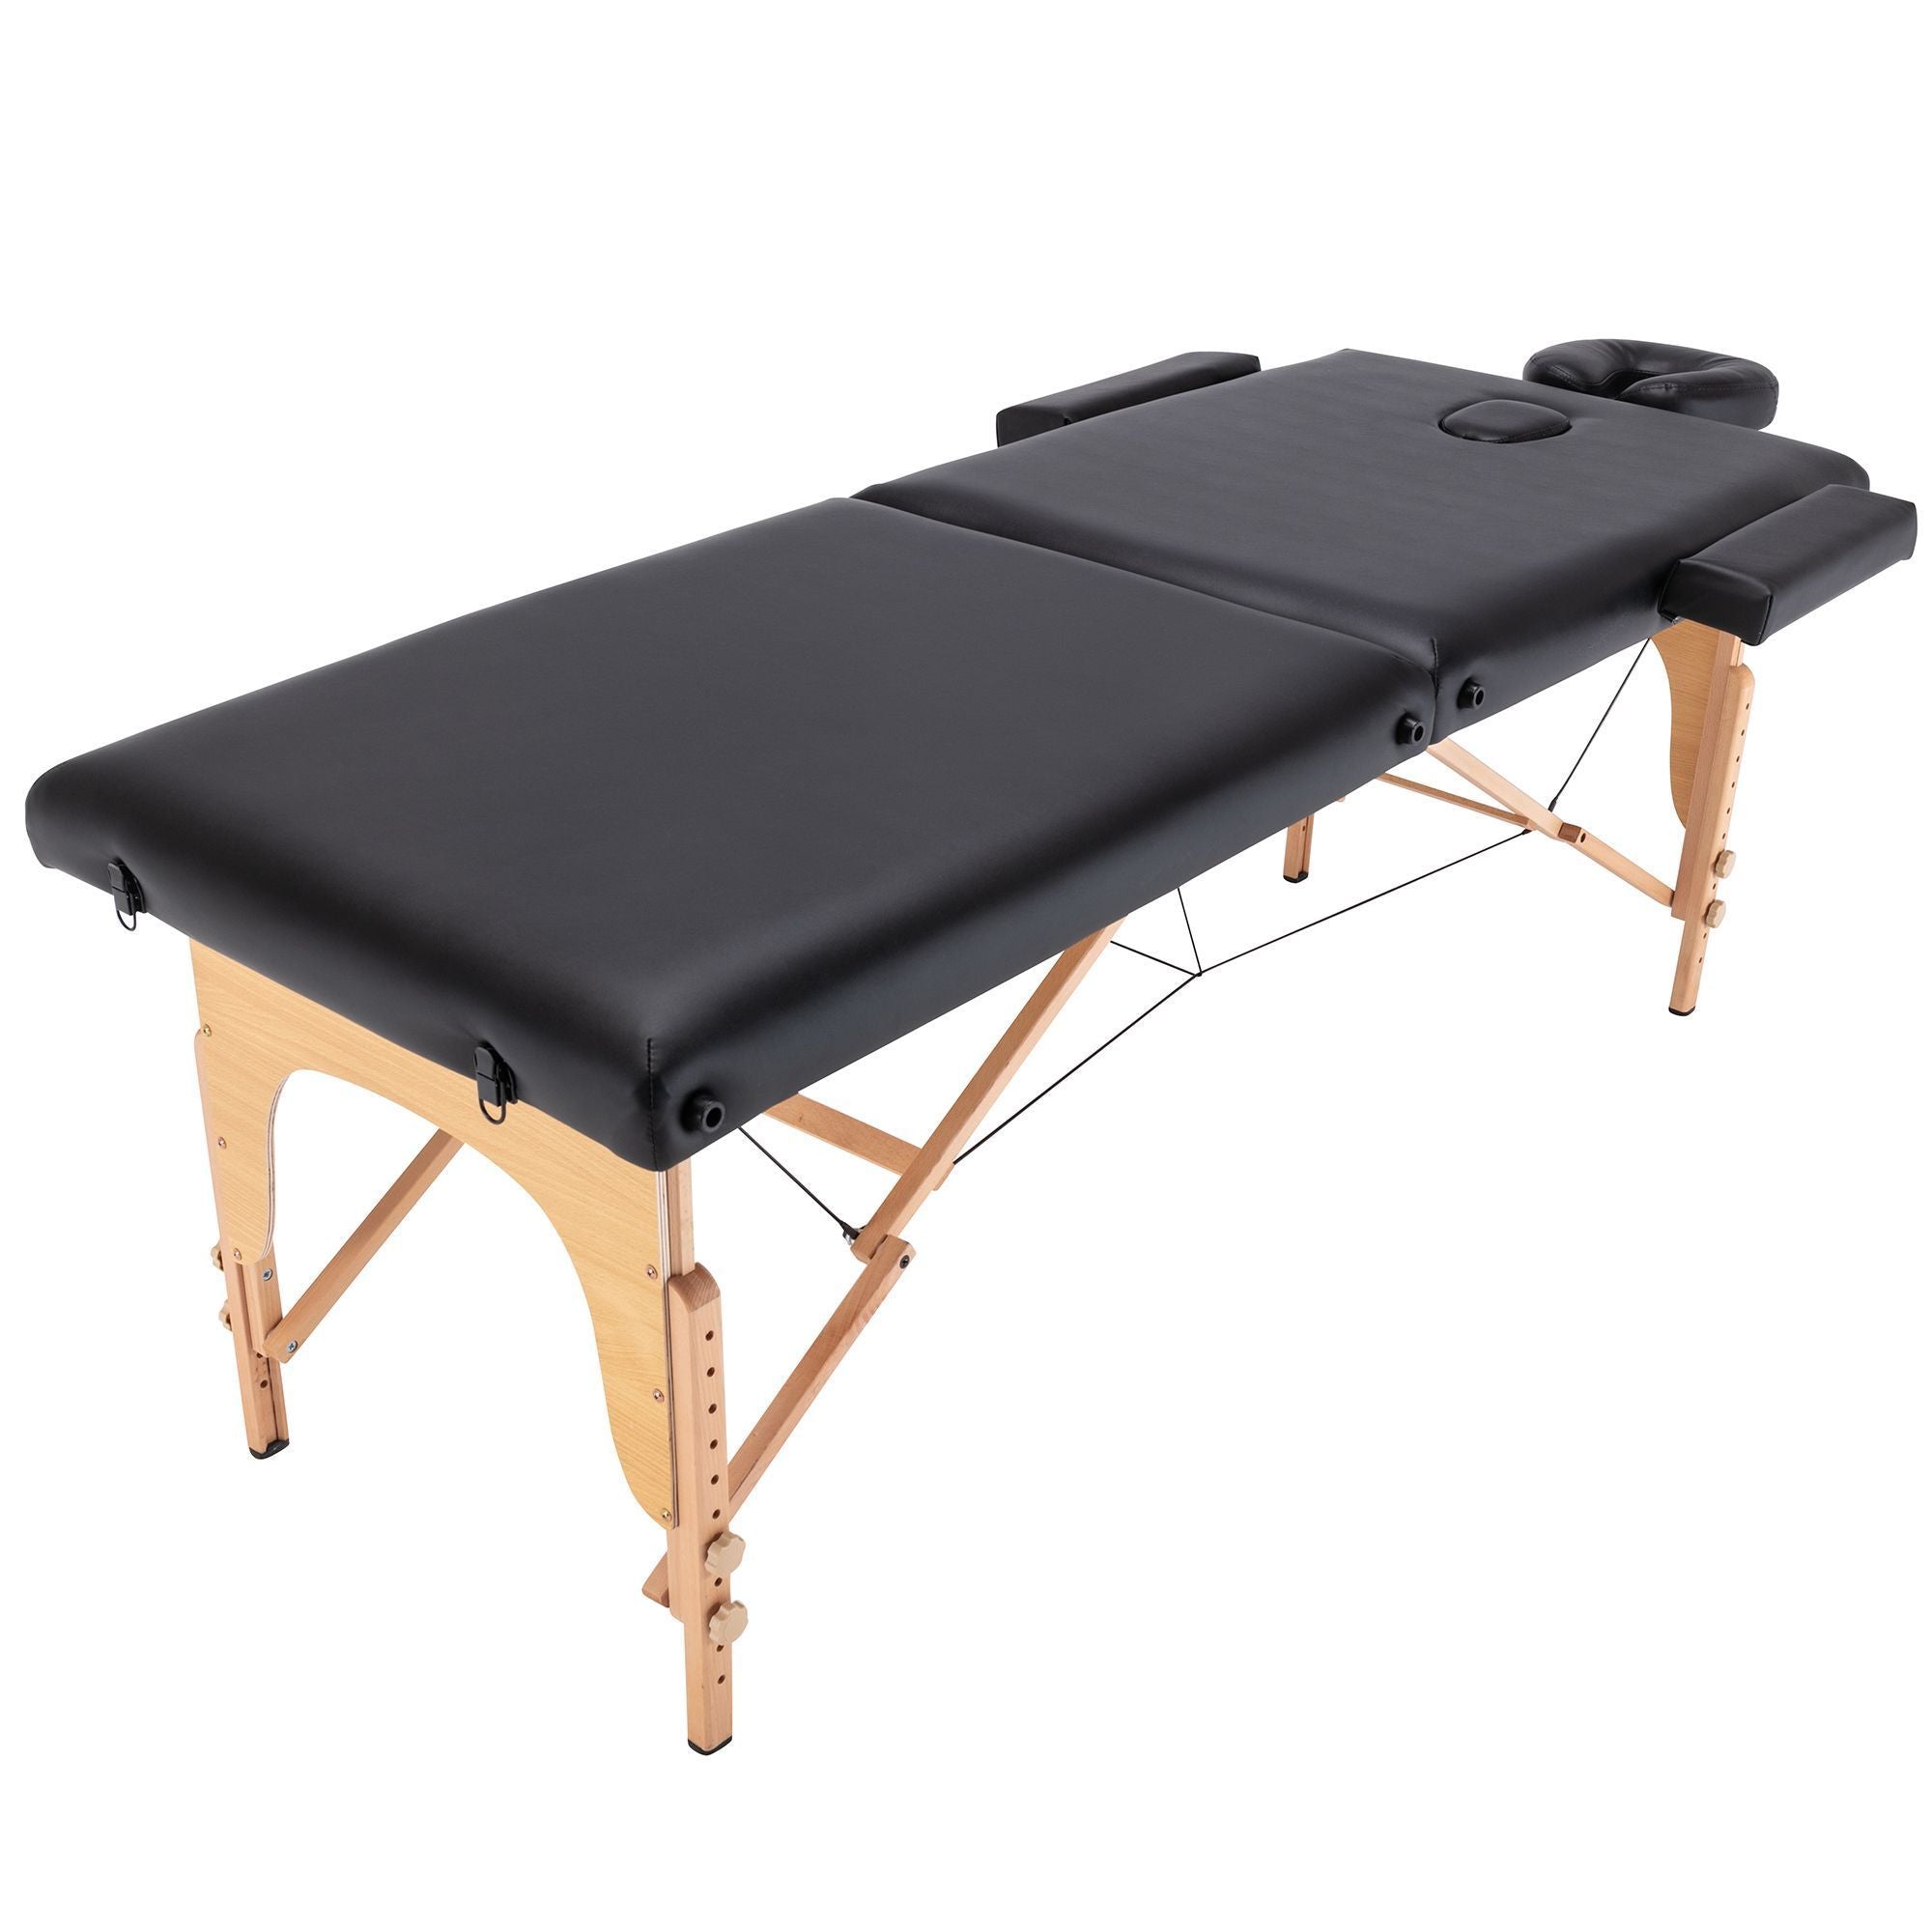 Portable Massage table, 2 Section Adjustable Folding Massage Table,PU leather Spa Bed-Boyel Living